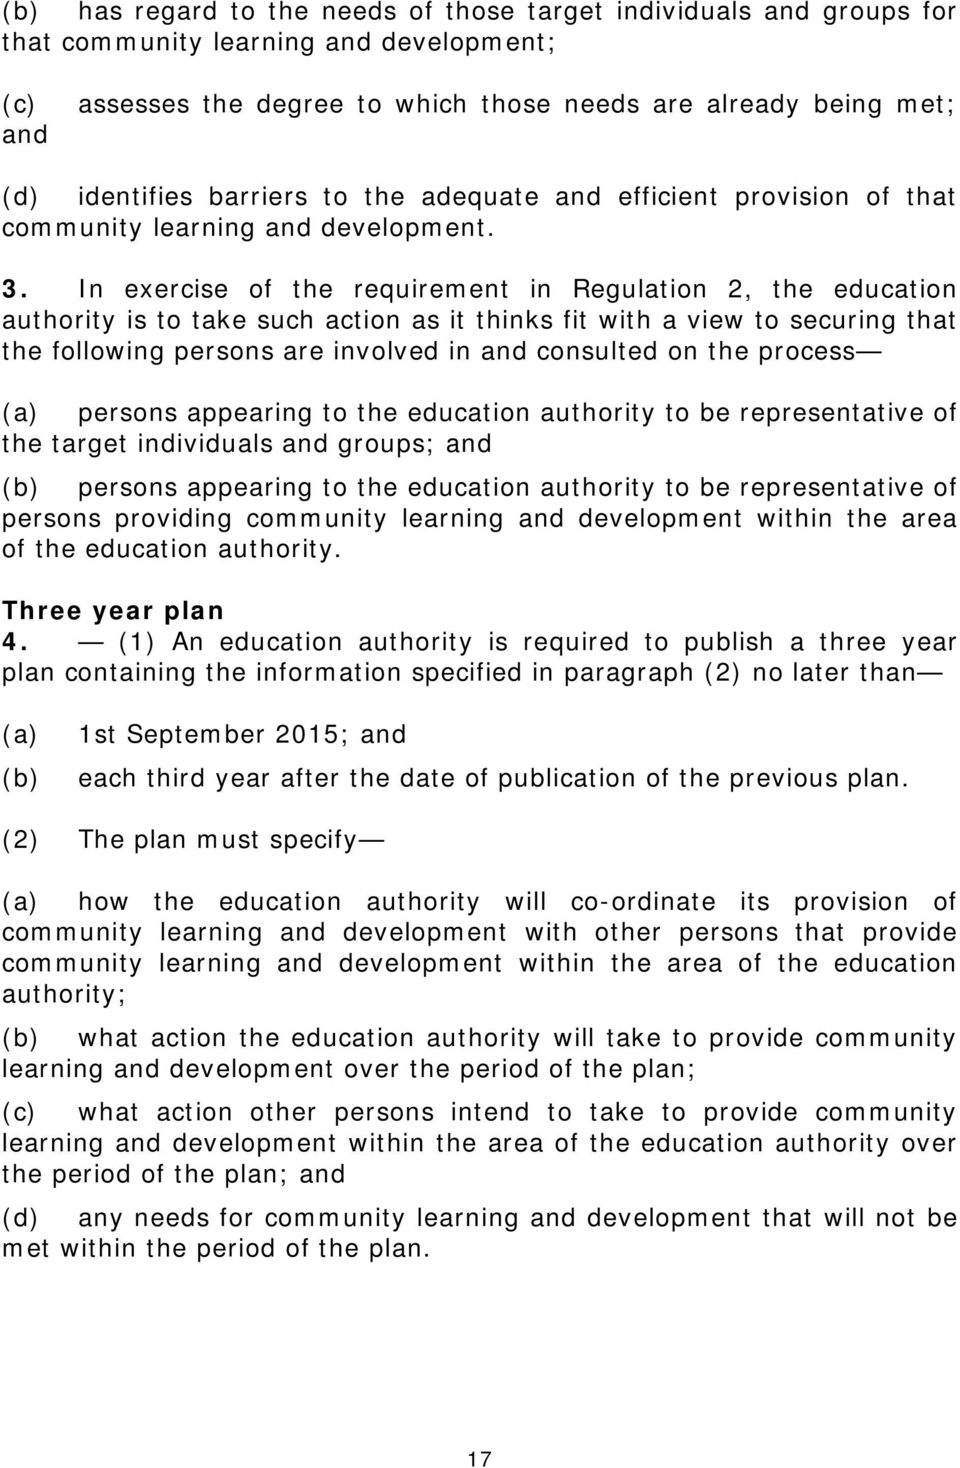 In exercise of the requirement in Regulation 2, the education authority is to take such action as it thinks fit with a view to securing that the following persons are involved in and consulted on the